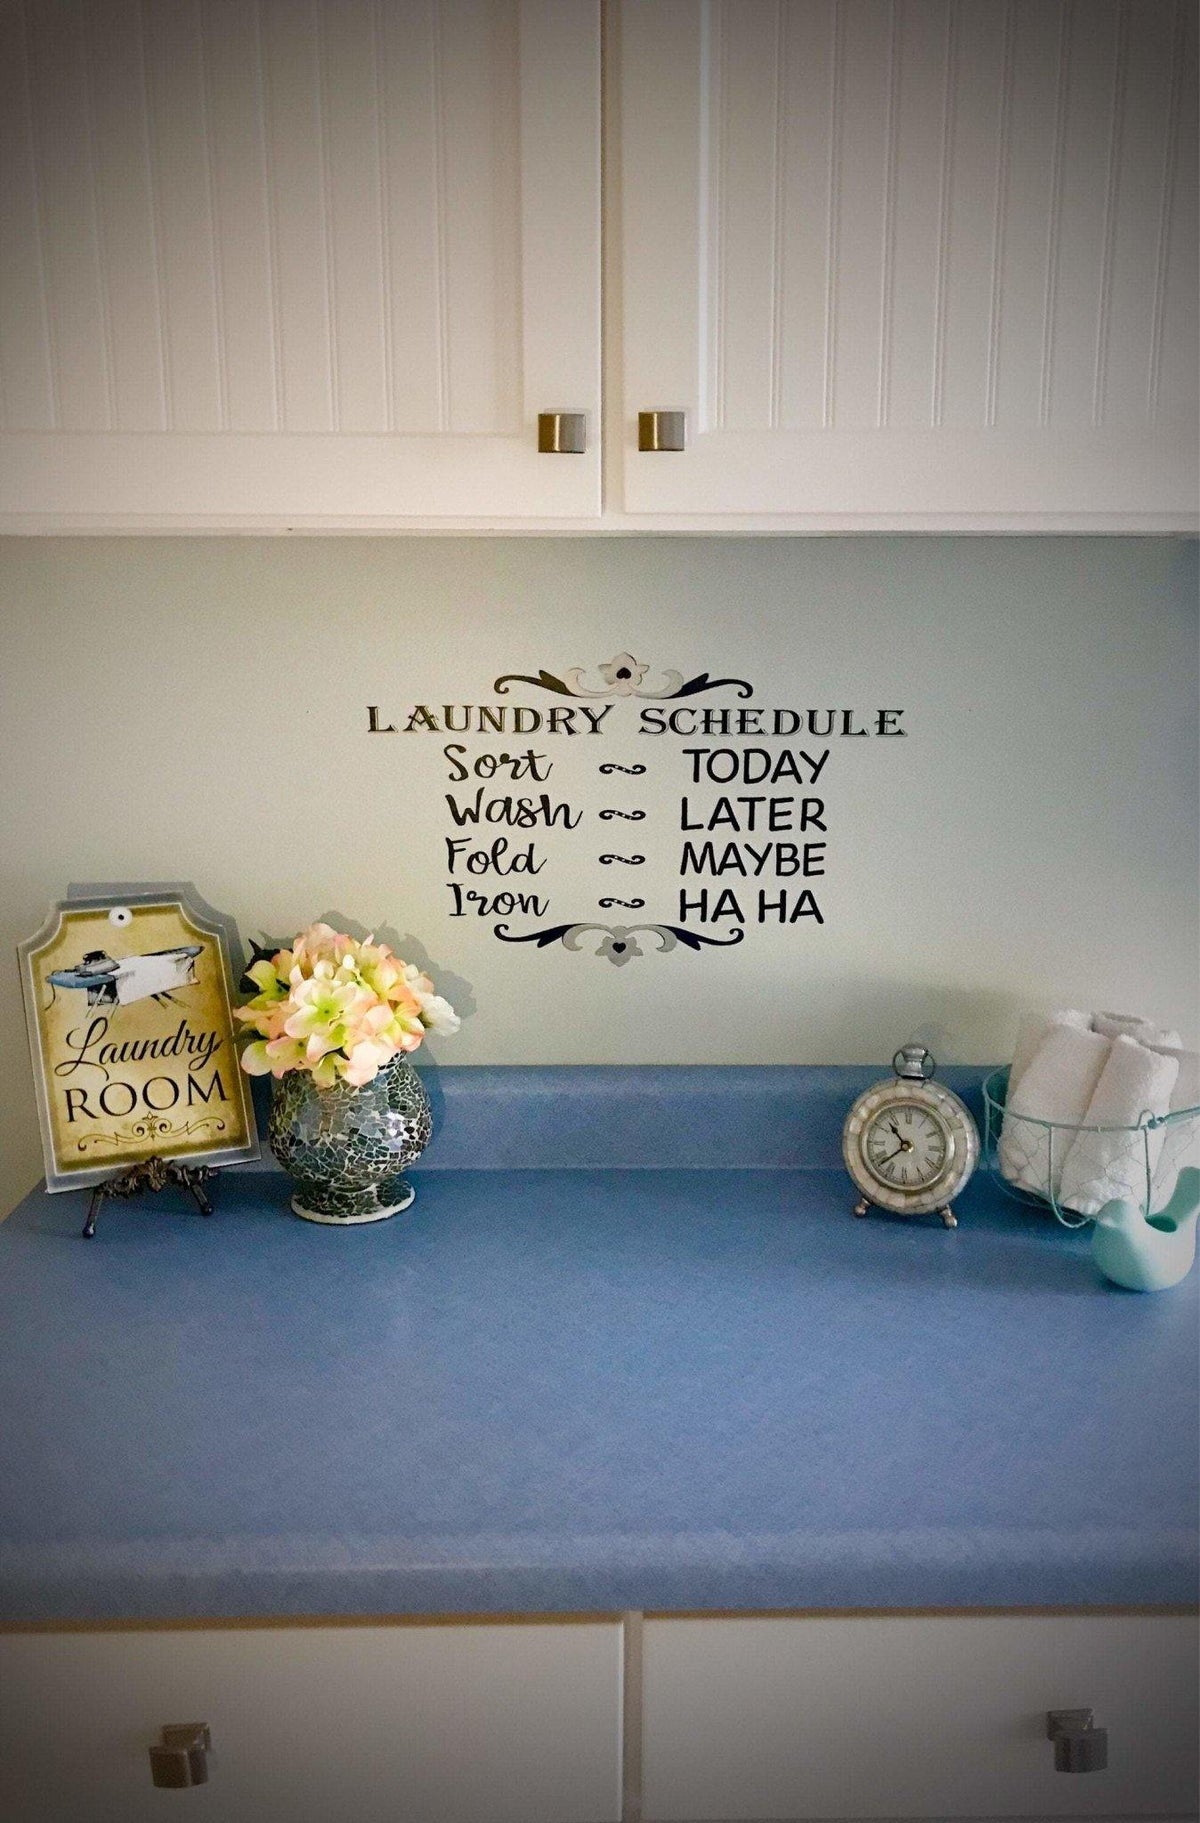 Laundry Room | Laundry Schedule |  Vinyl | wall decal | Laundry Decor - This &amp; That Solutions - Laundry Room | Laundry Schedule |  Vinyl | wall decal | Laundry Decor - Personalized Gifts &amp; Custom Home Decor